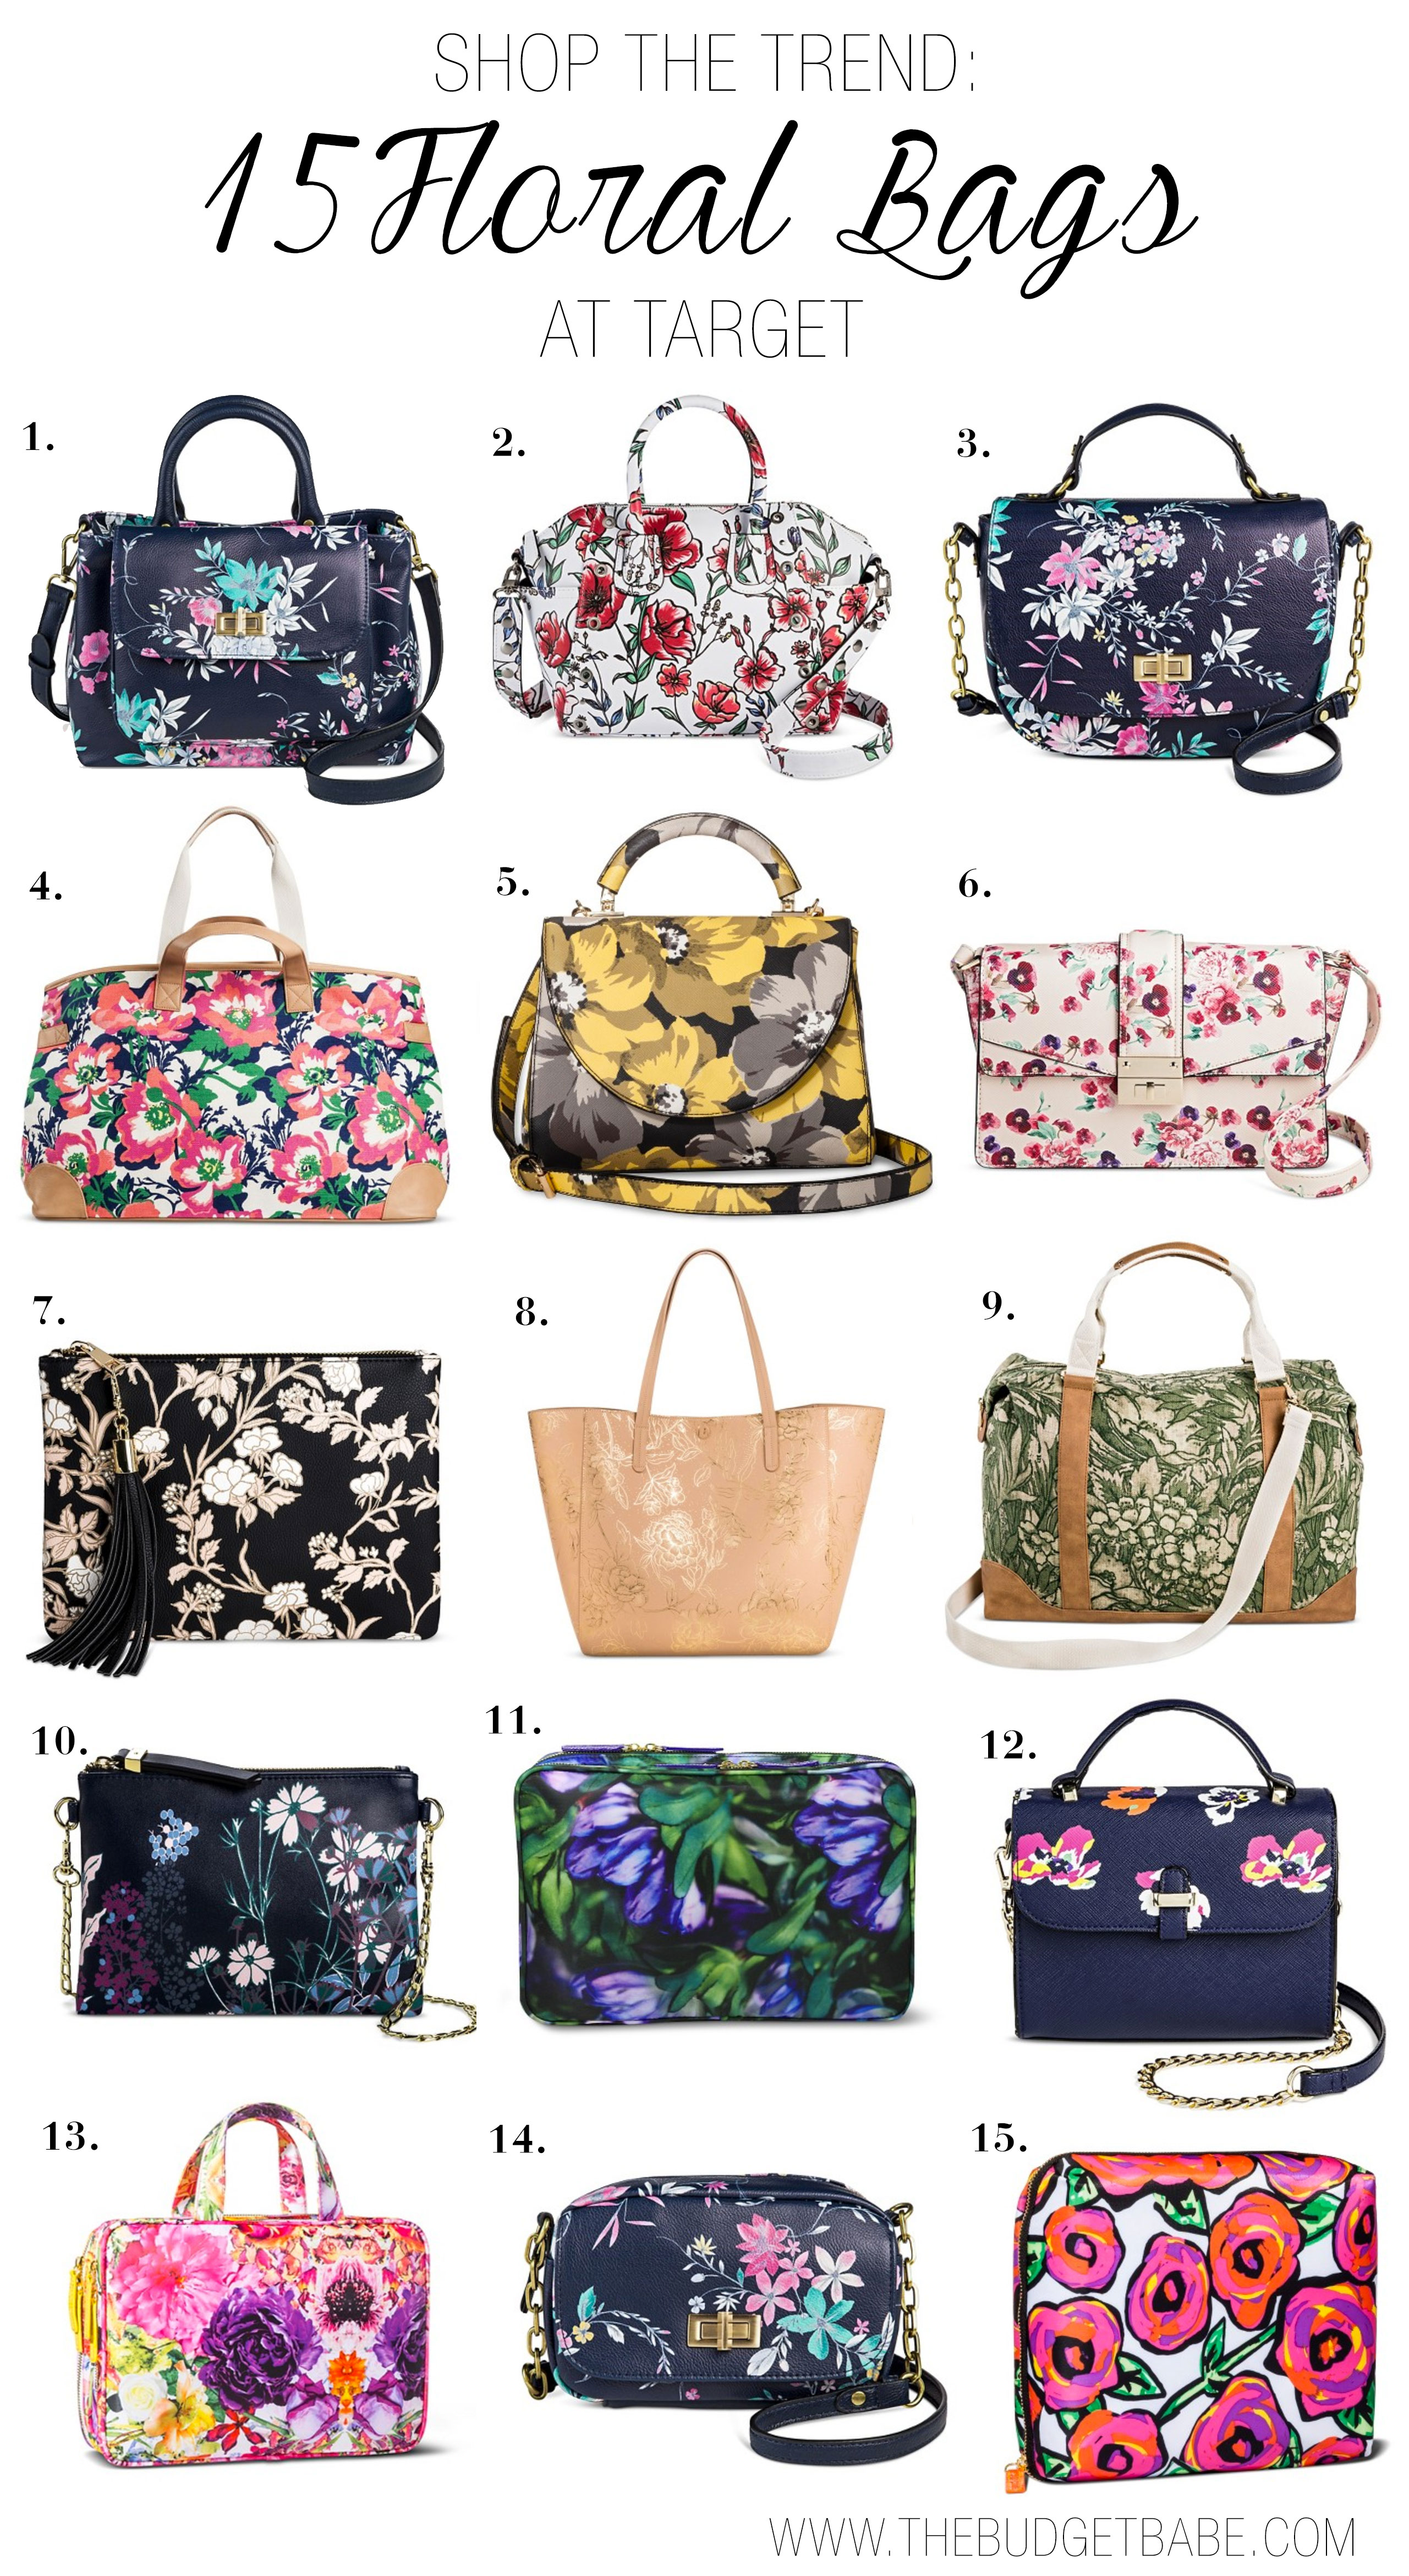 Shop the floral bag trend with these budget-friendly picks under $45 at Target.